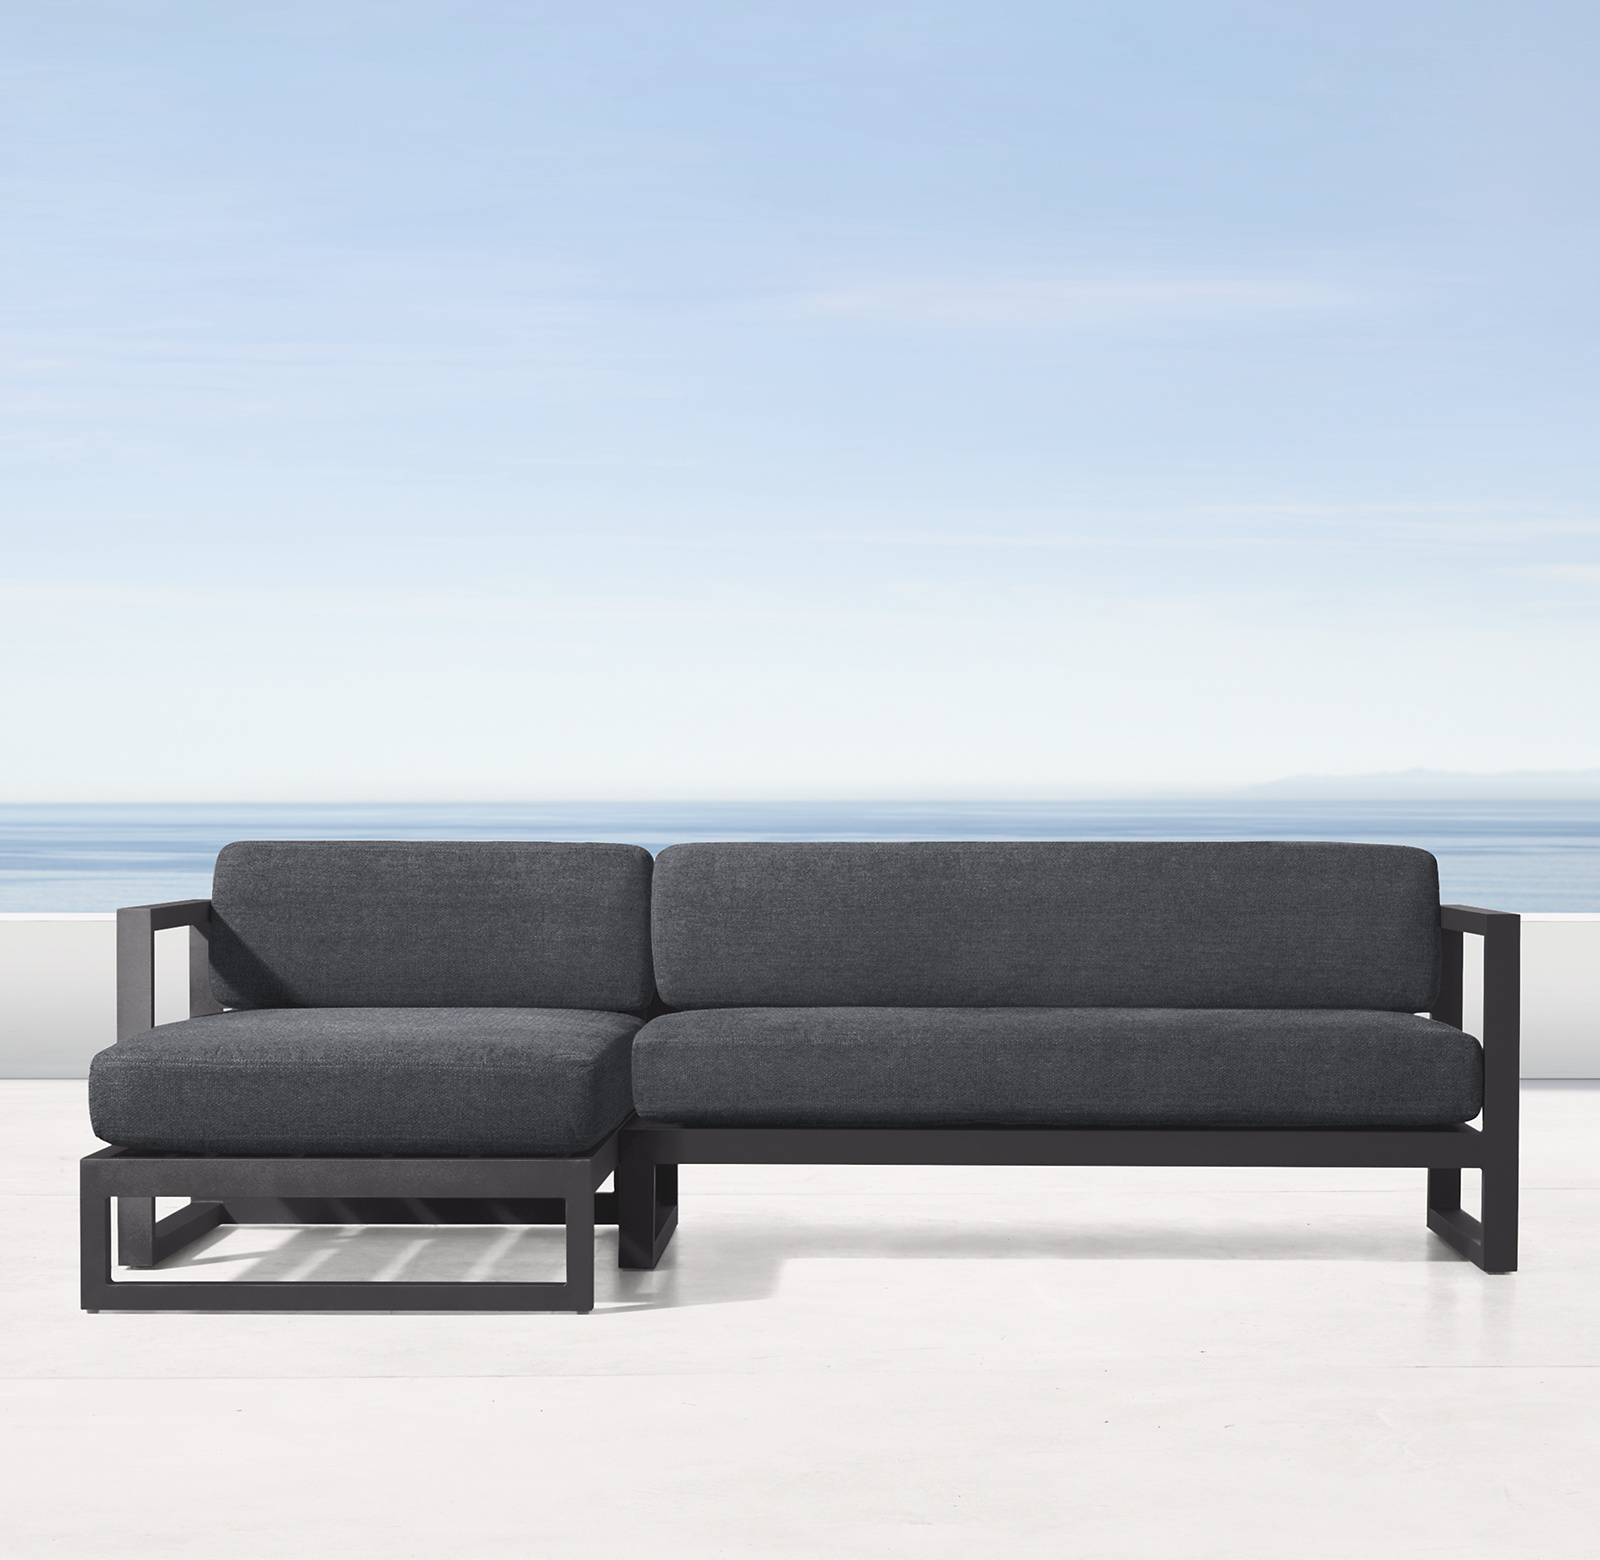 Shown in Slate. Cushions (sold separately) shown in Charcoal Perennials&#174; Performance Canvas. Sectional consists of 1 left-arm chaise and 1 two-seat right-arm sofa.